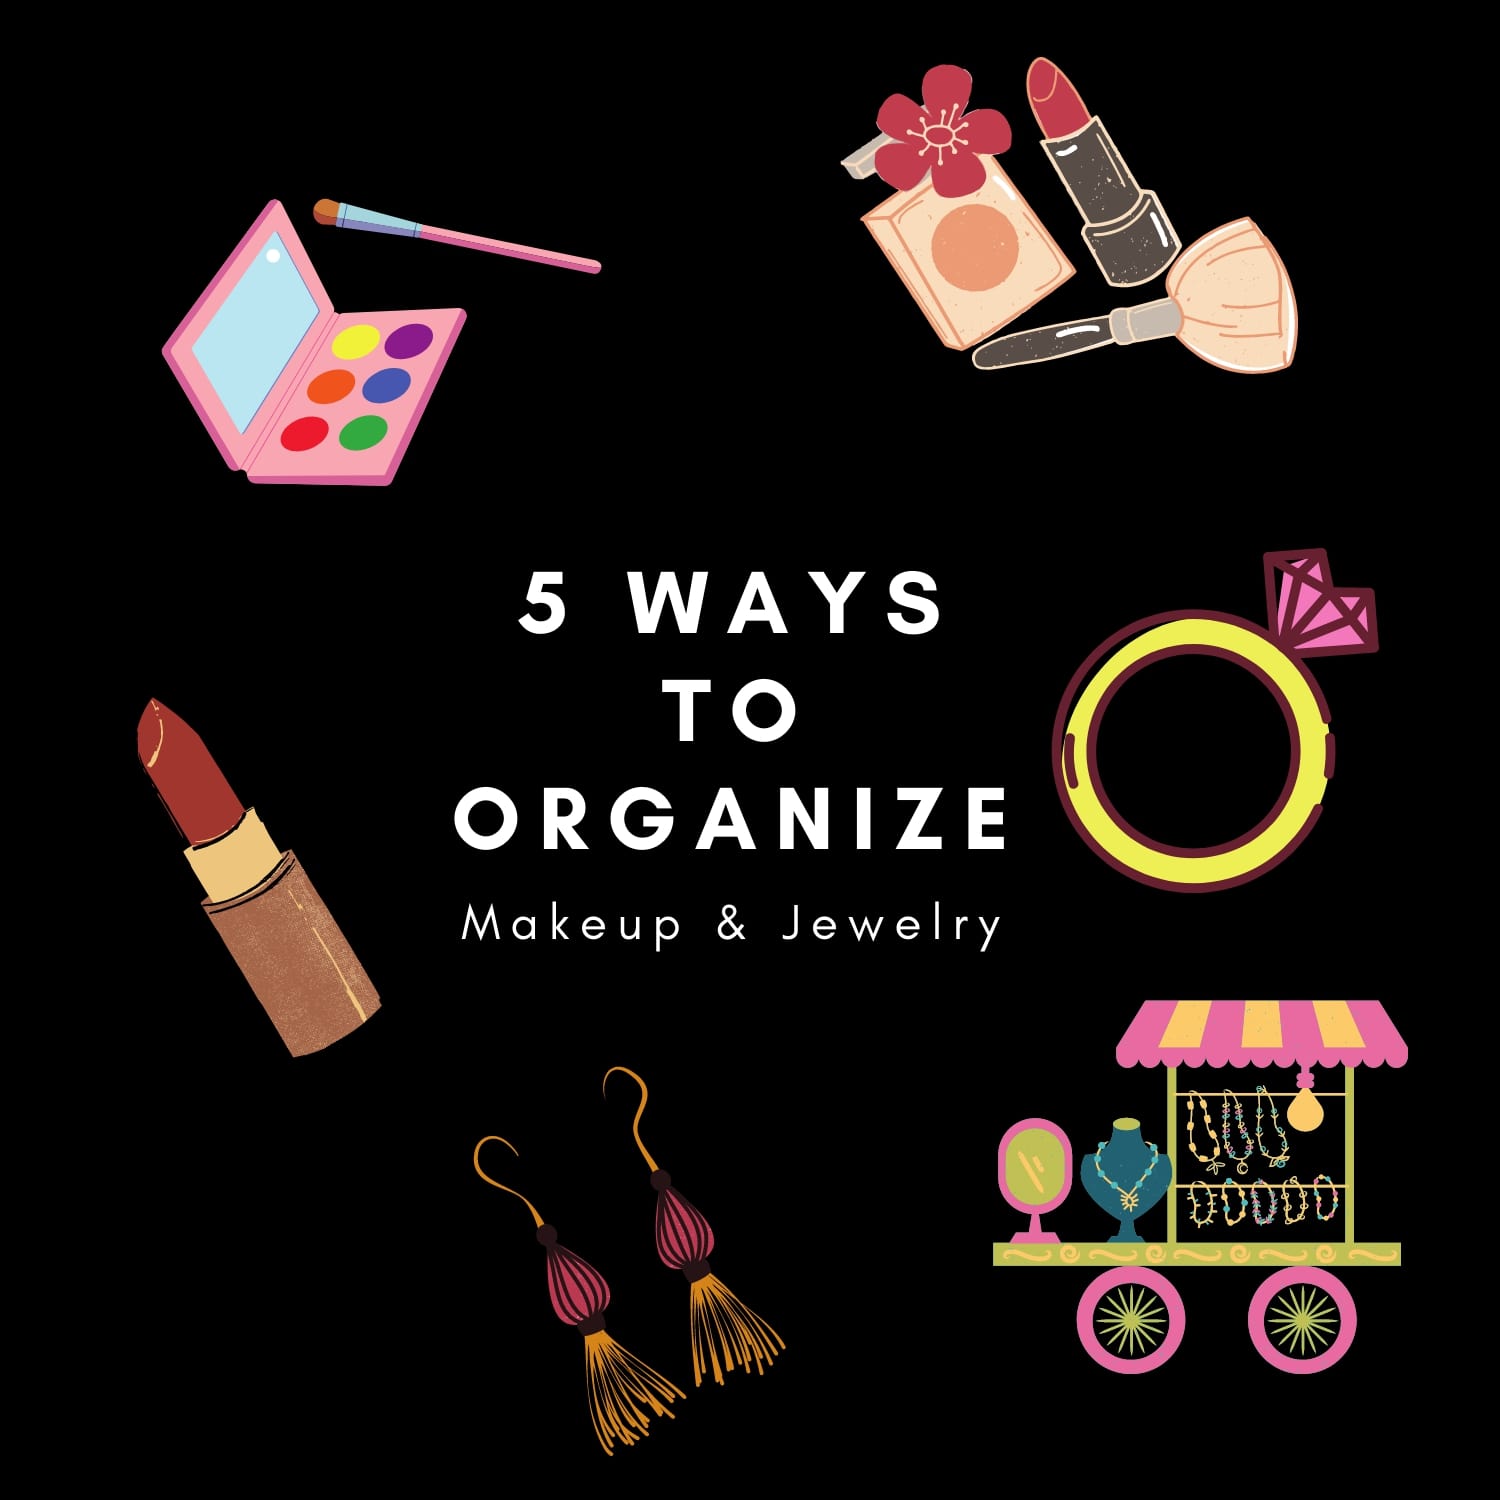 5 Smart Ways to Organize Jewelry and Makeup